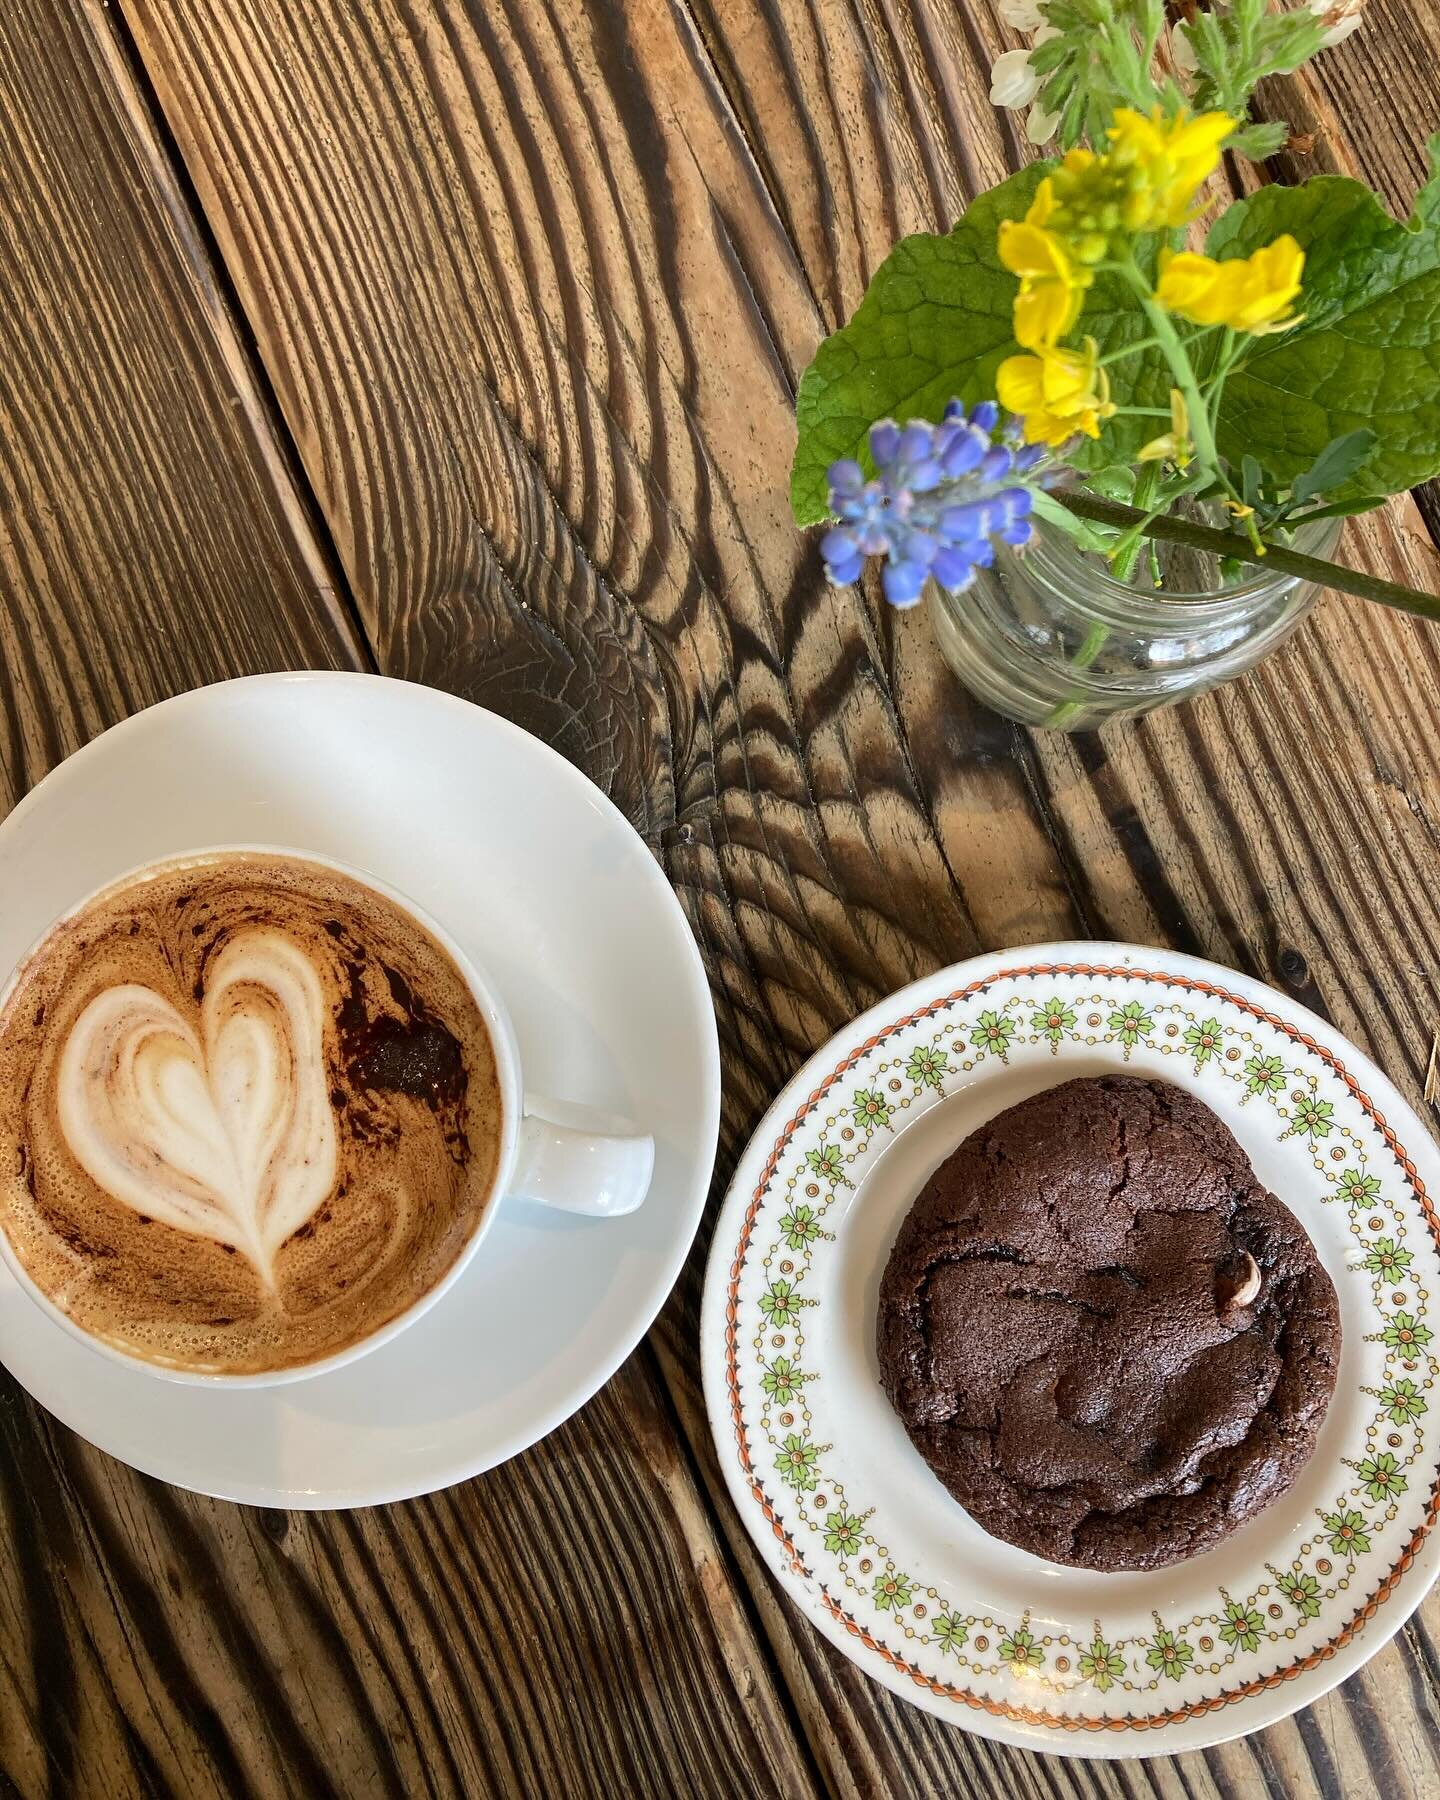 Mini egg choc - the perfect coffee &amp; cookie combo 🐇🌷🥚🐣🪻🪺 

#easterhols #marchweather #wednesday #platformcafe #coffee #cakes #warmyourcockles